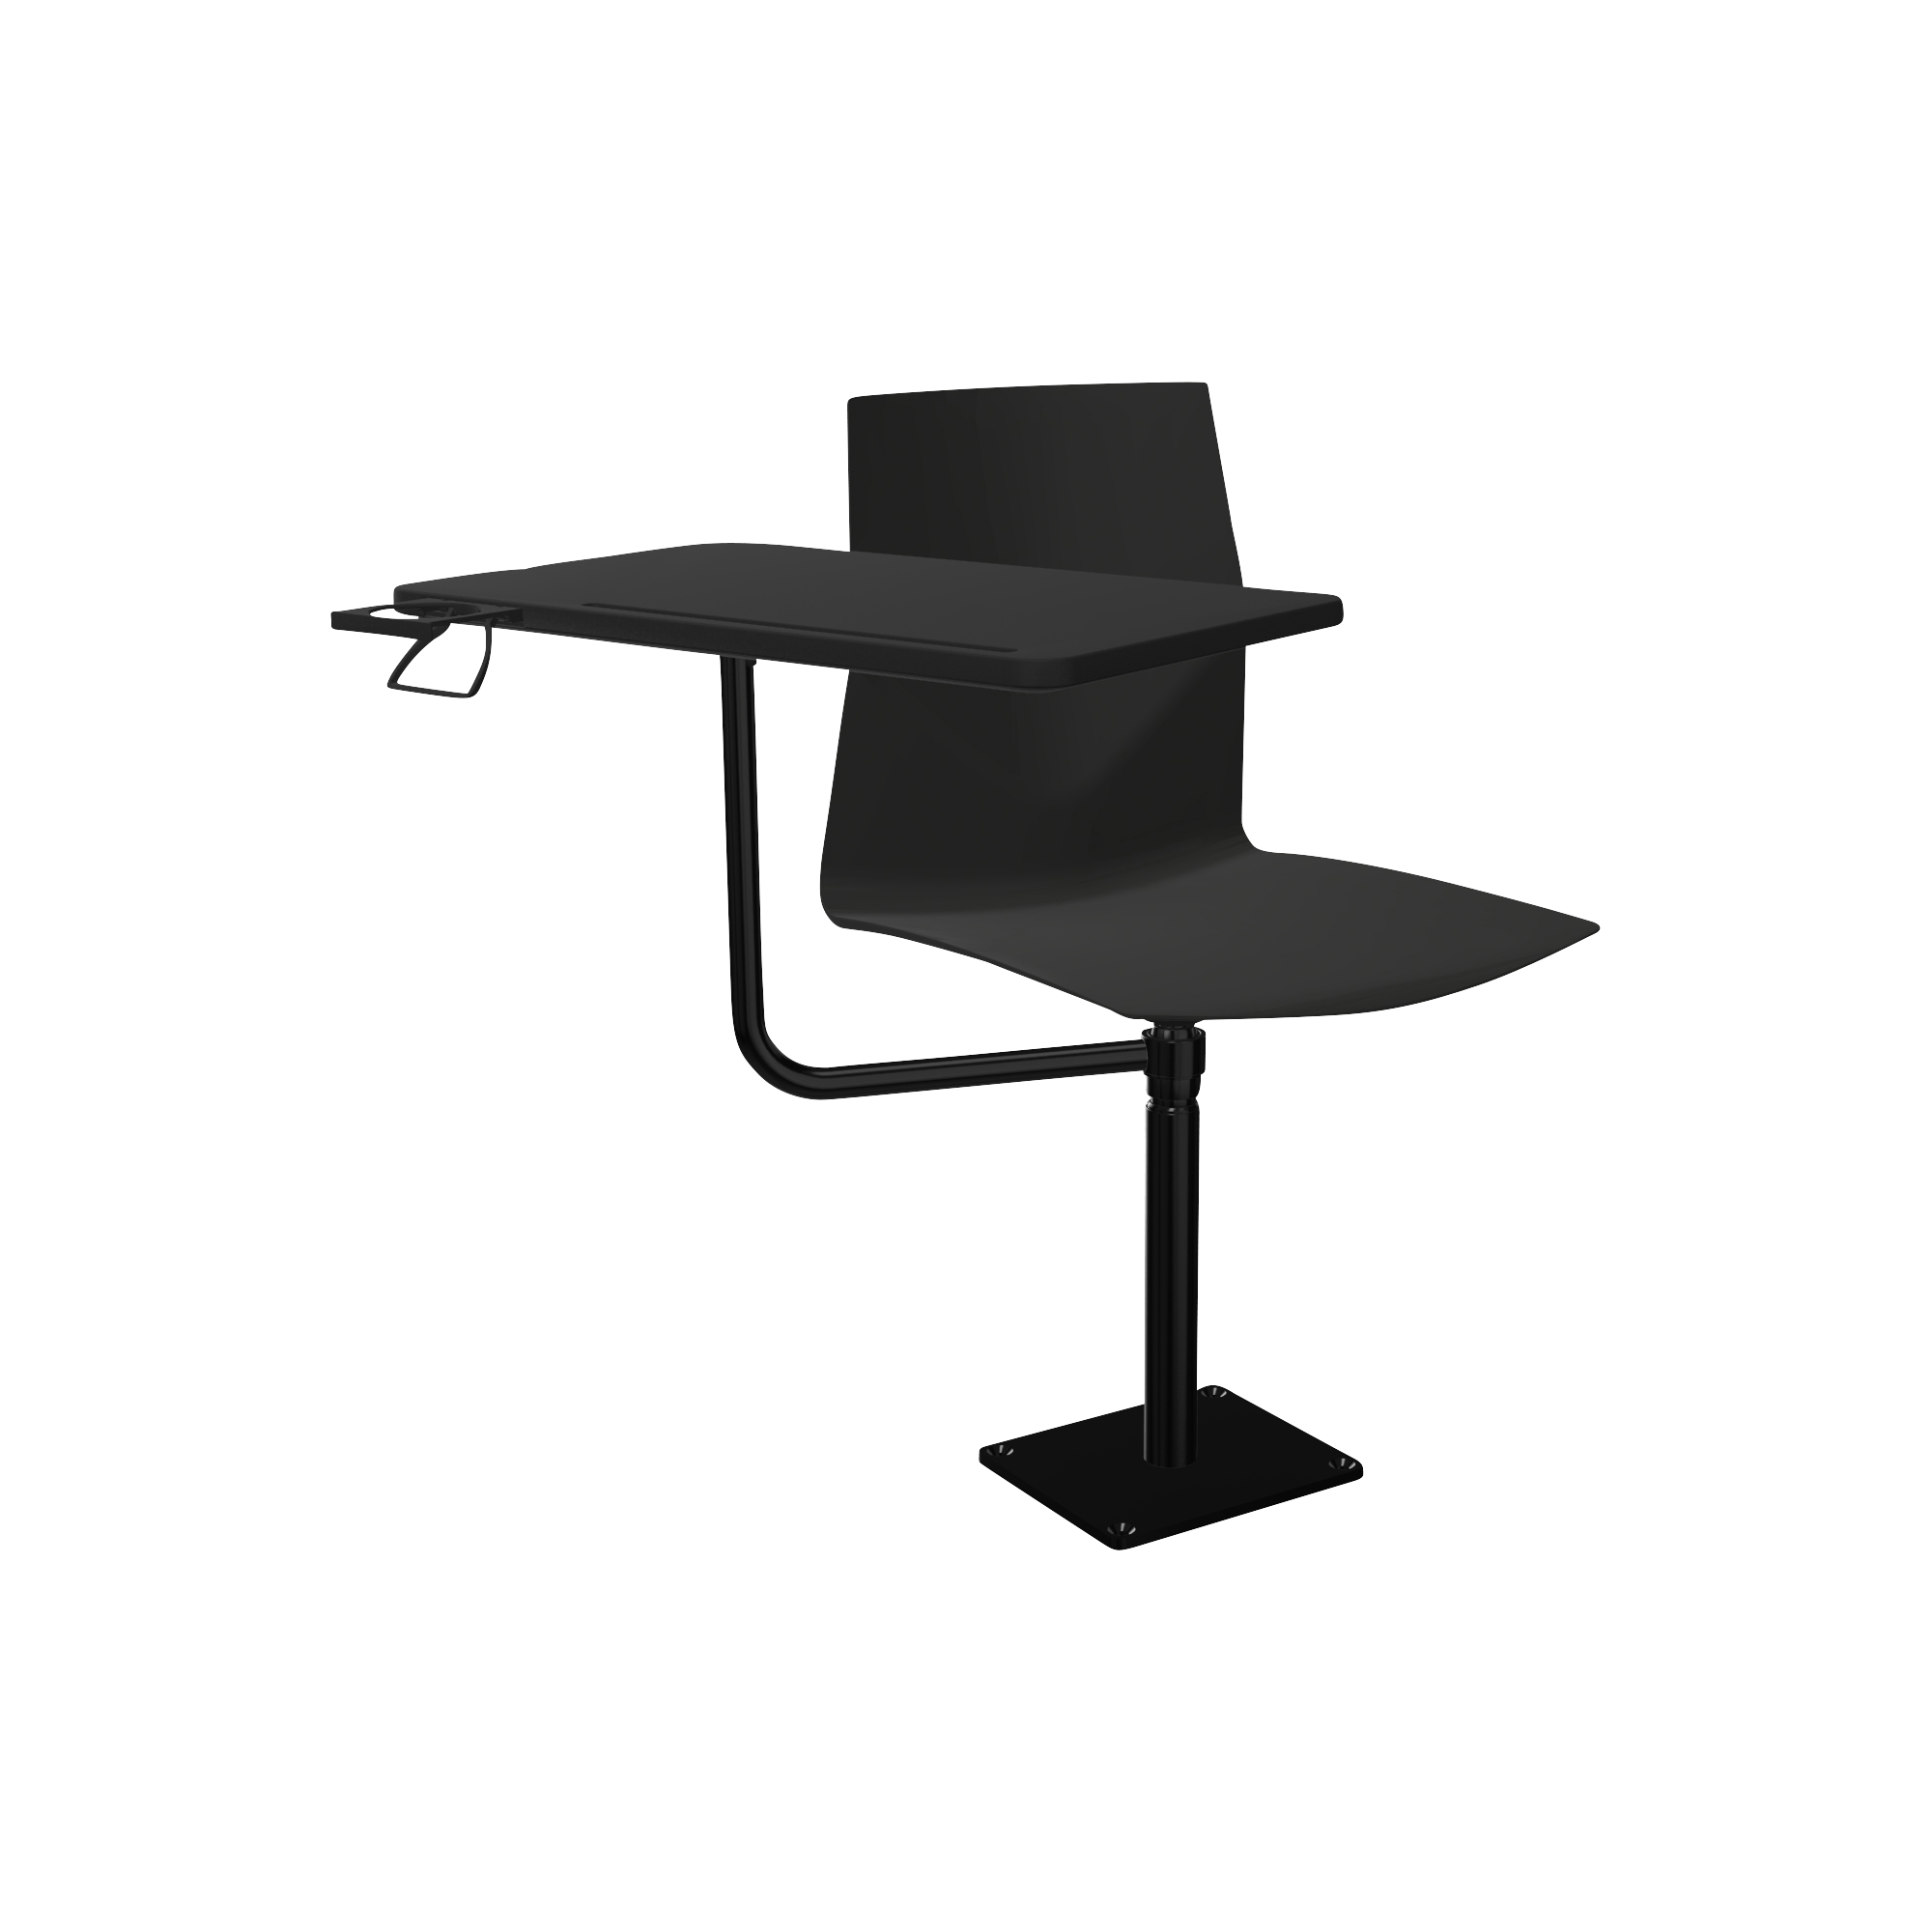 A black chair with a black desk on it.